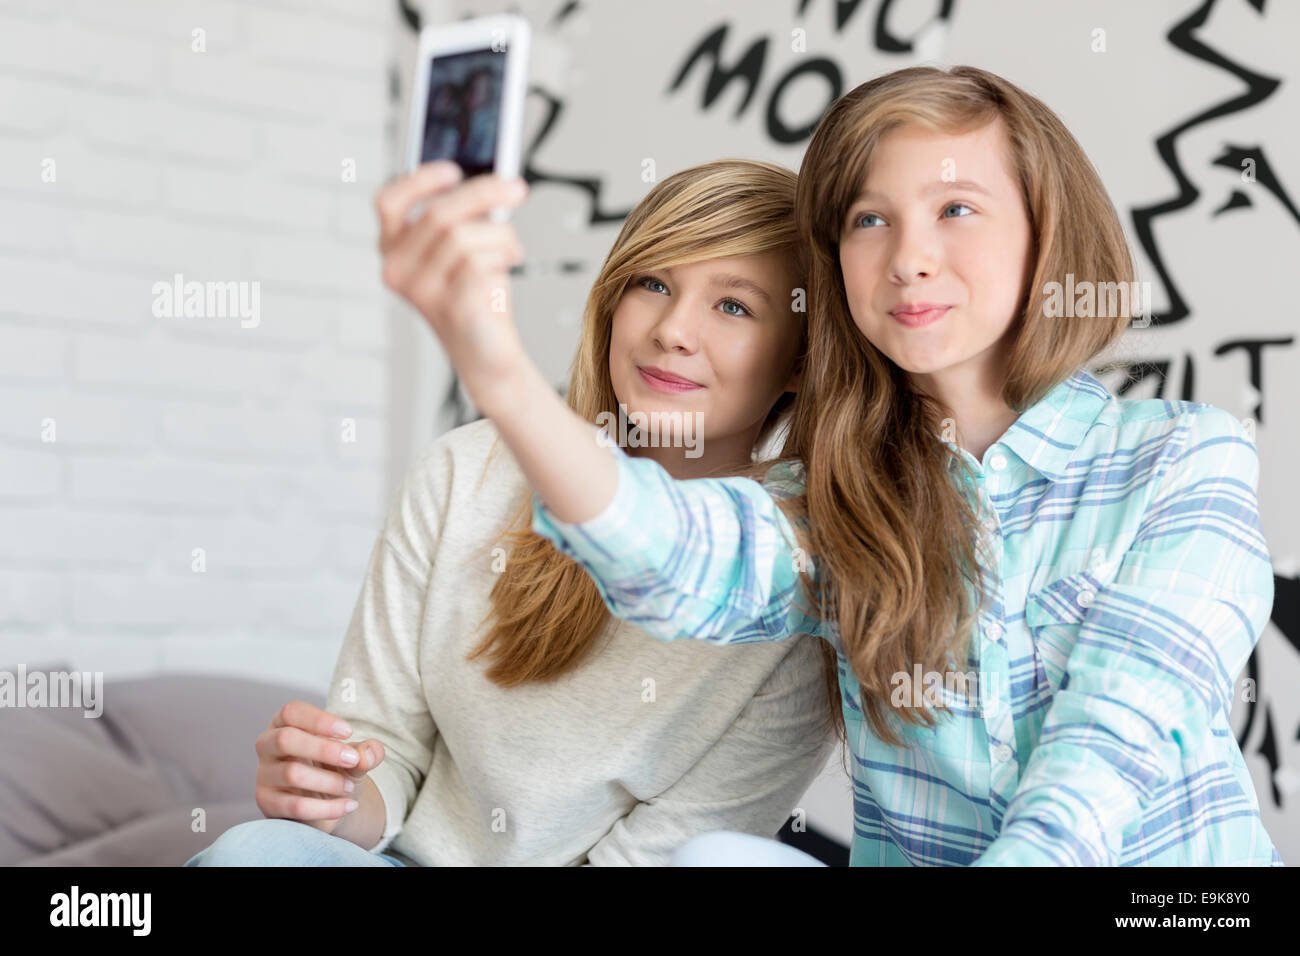 Cute sisters taking photos with smart phone at home Stock Photo